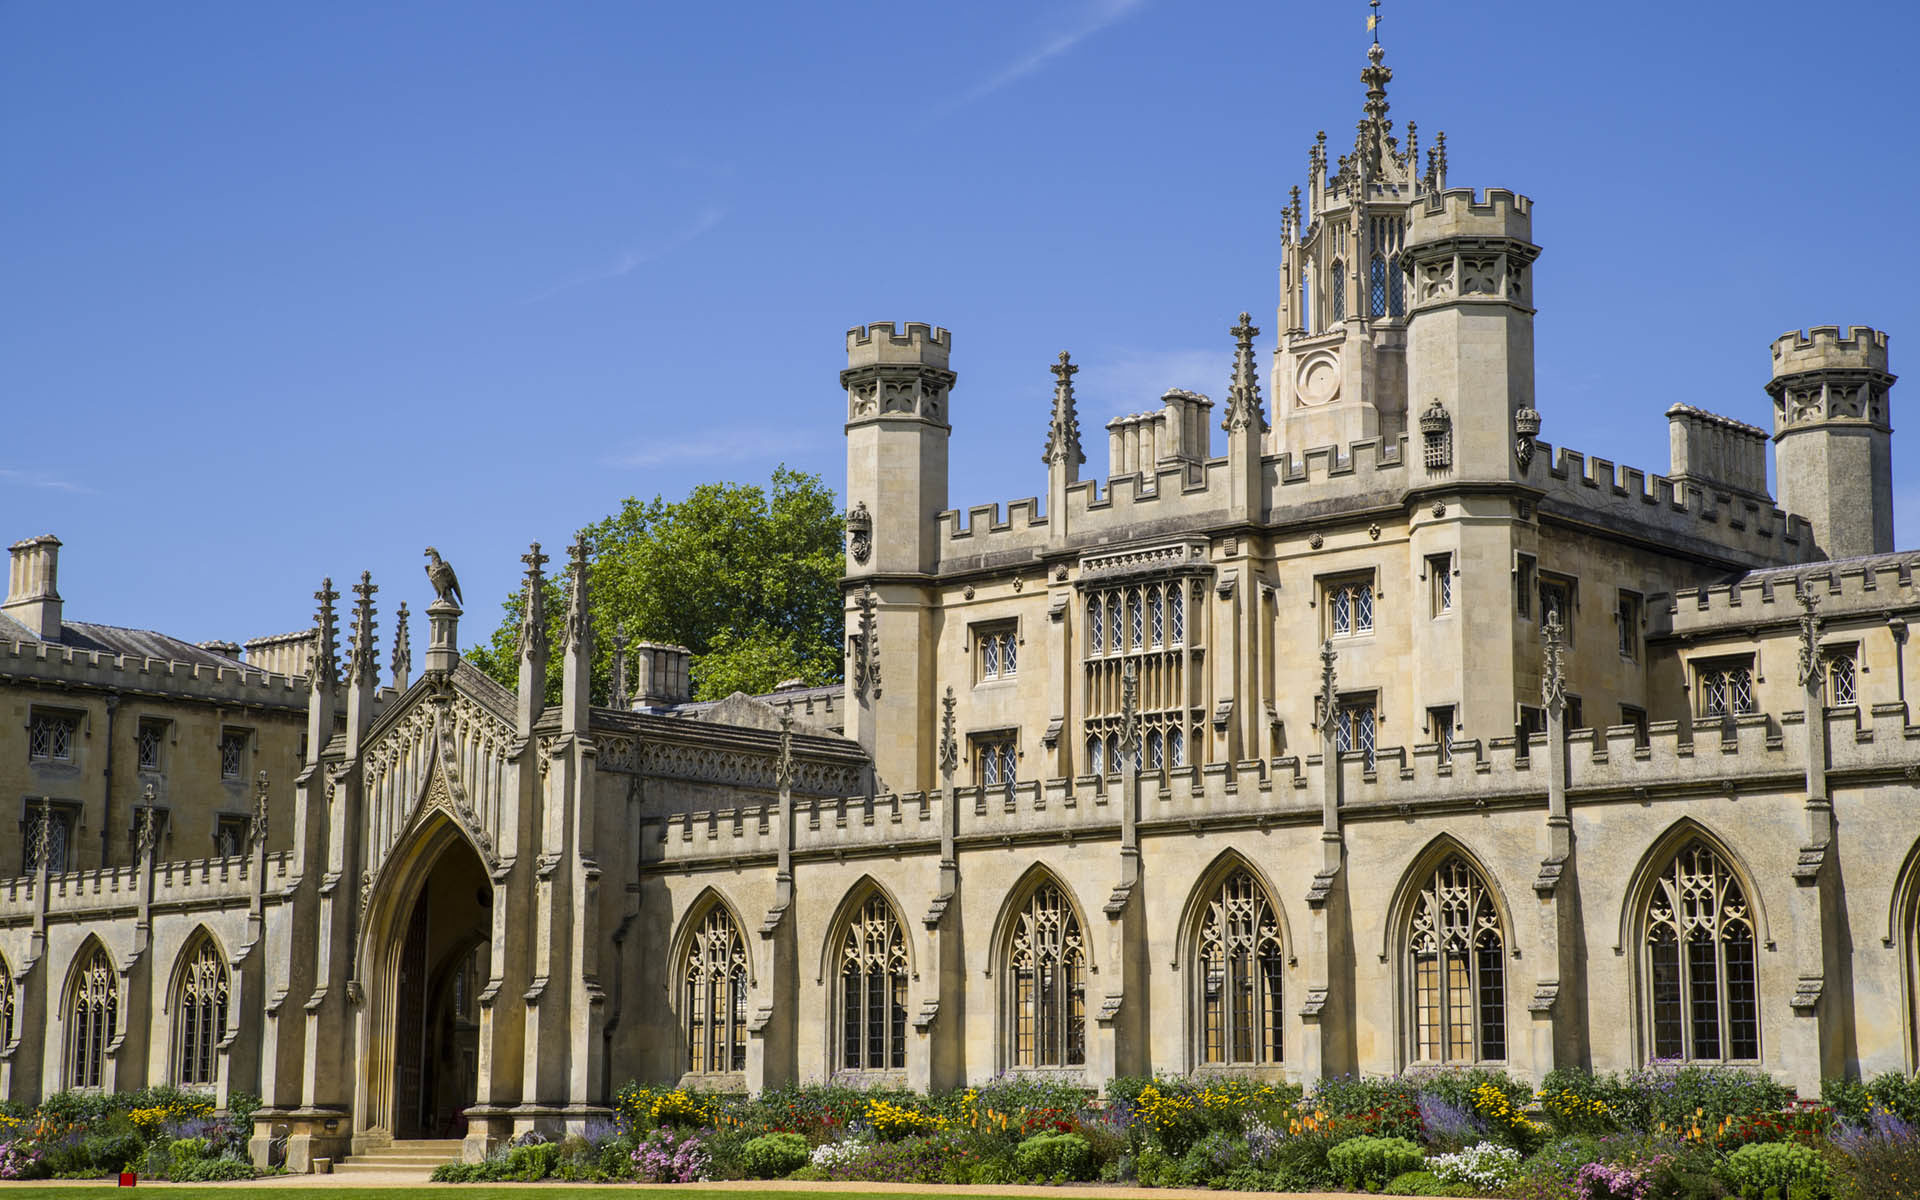 Cambridge University: Cryptocurrency Use Seeing ‘Significant Growth’